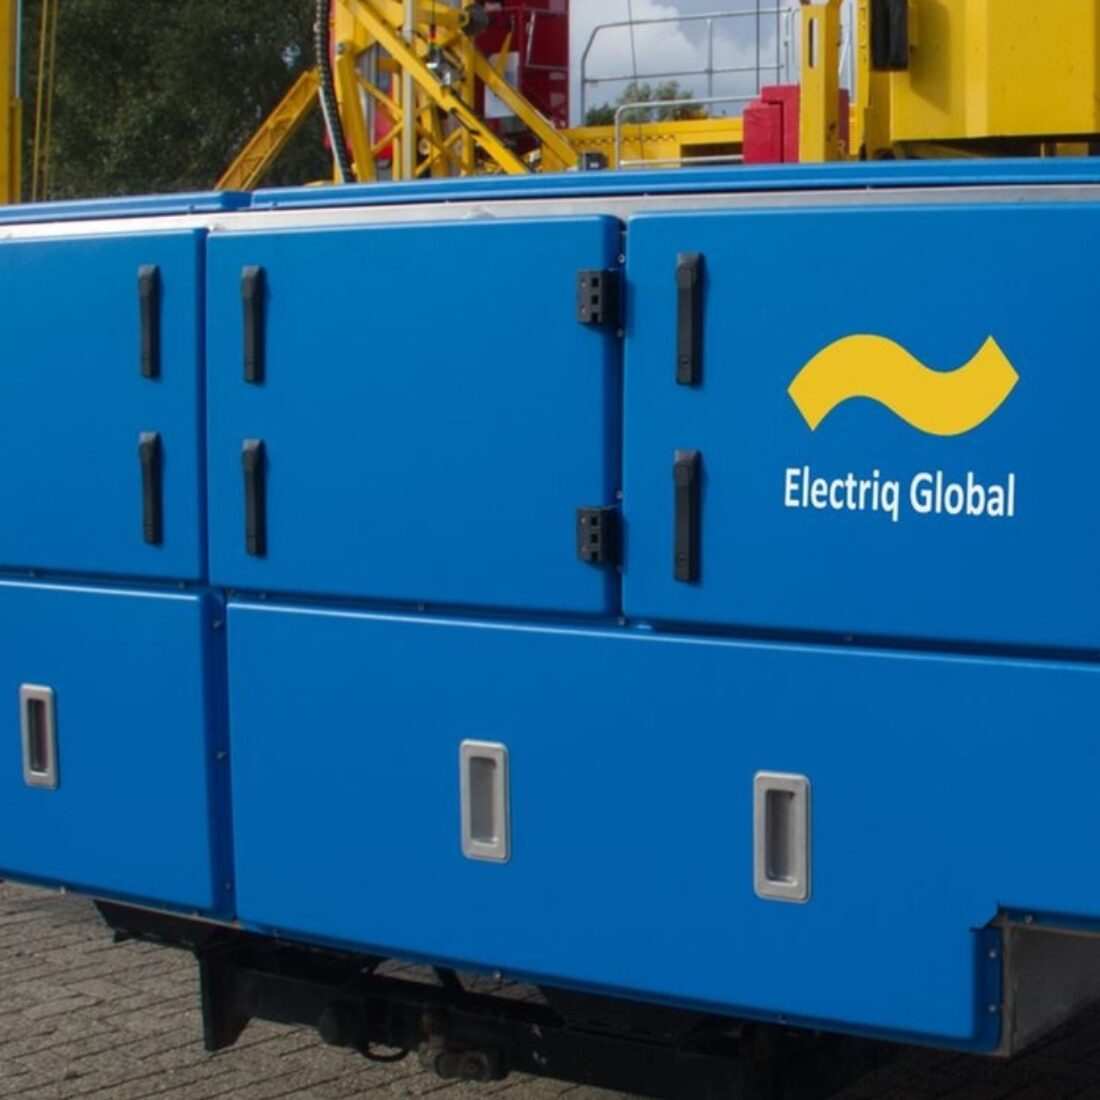 Electriq’s generator aims to offer solutions to off-the-grid and backup power clients. Photo courtesy of Electriq